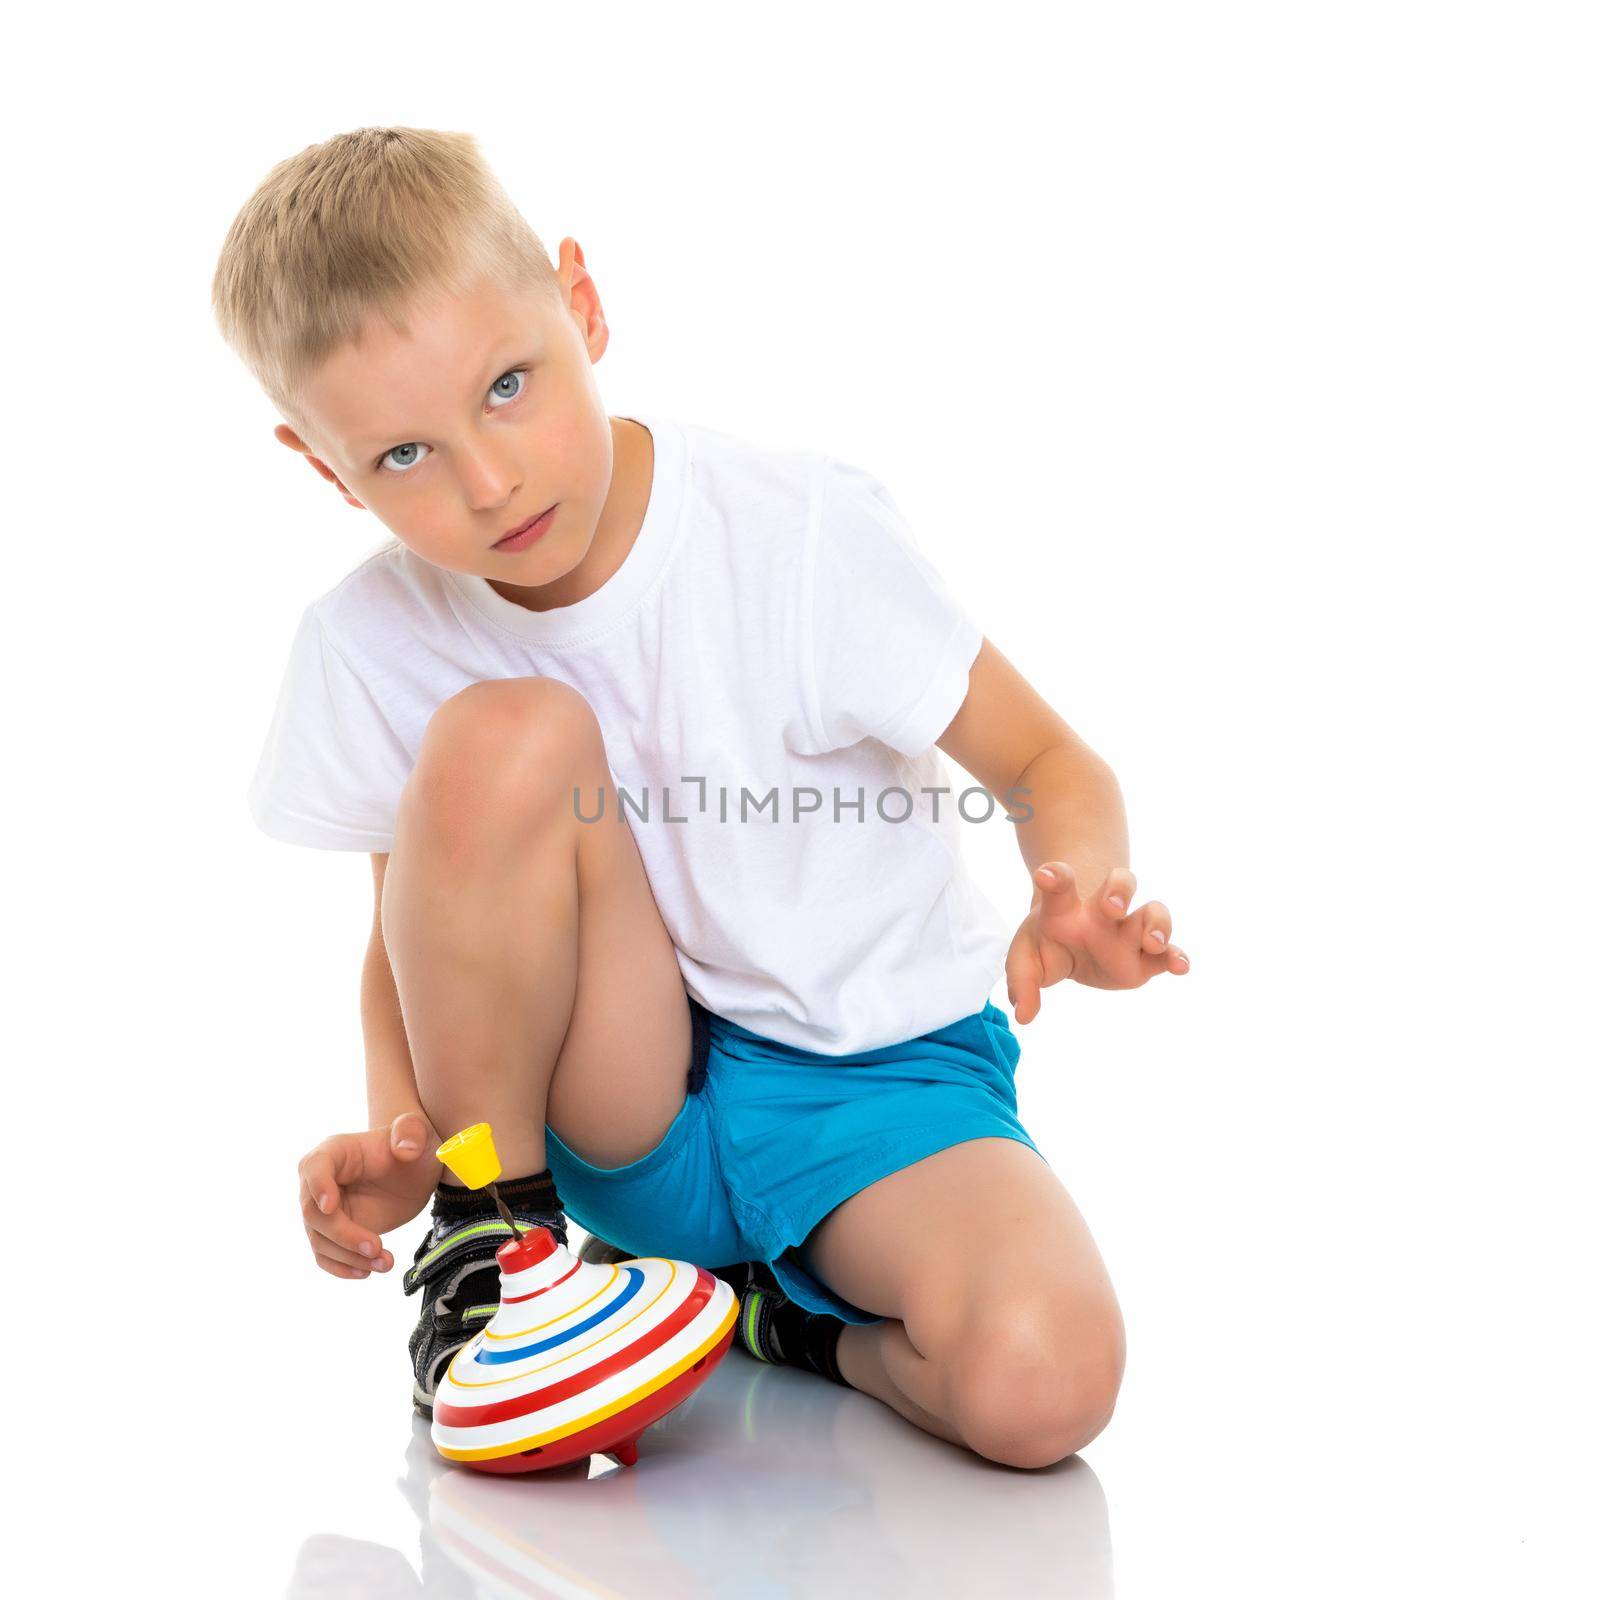 Little boy playing with a whirligig. Isolated on white background.